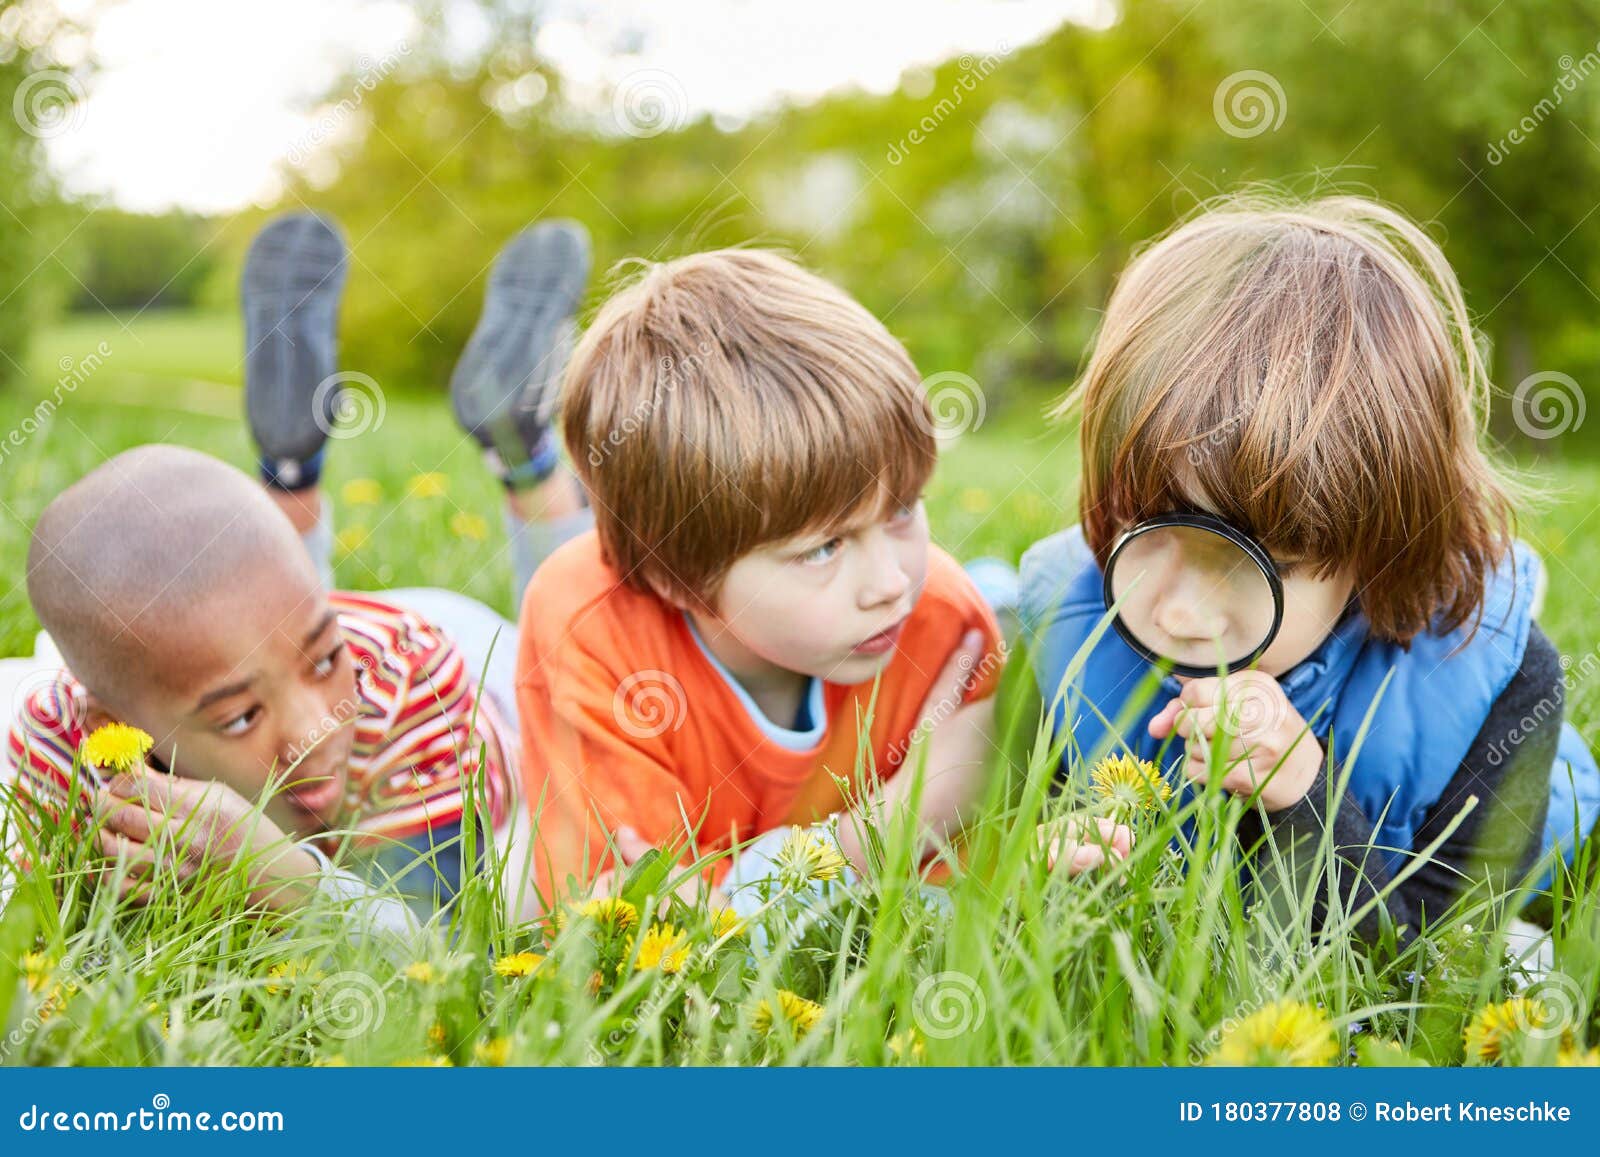 Children Explore the Nature with a Glass Photo - Image of learn: 180377808